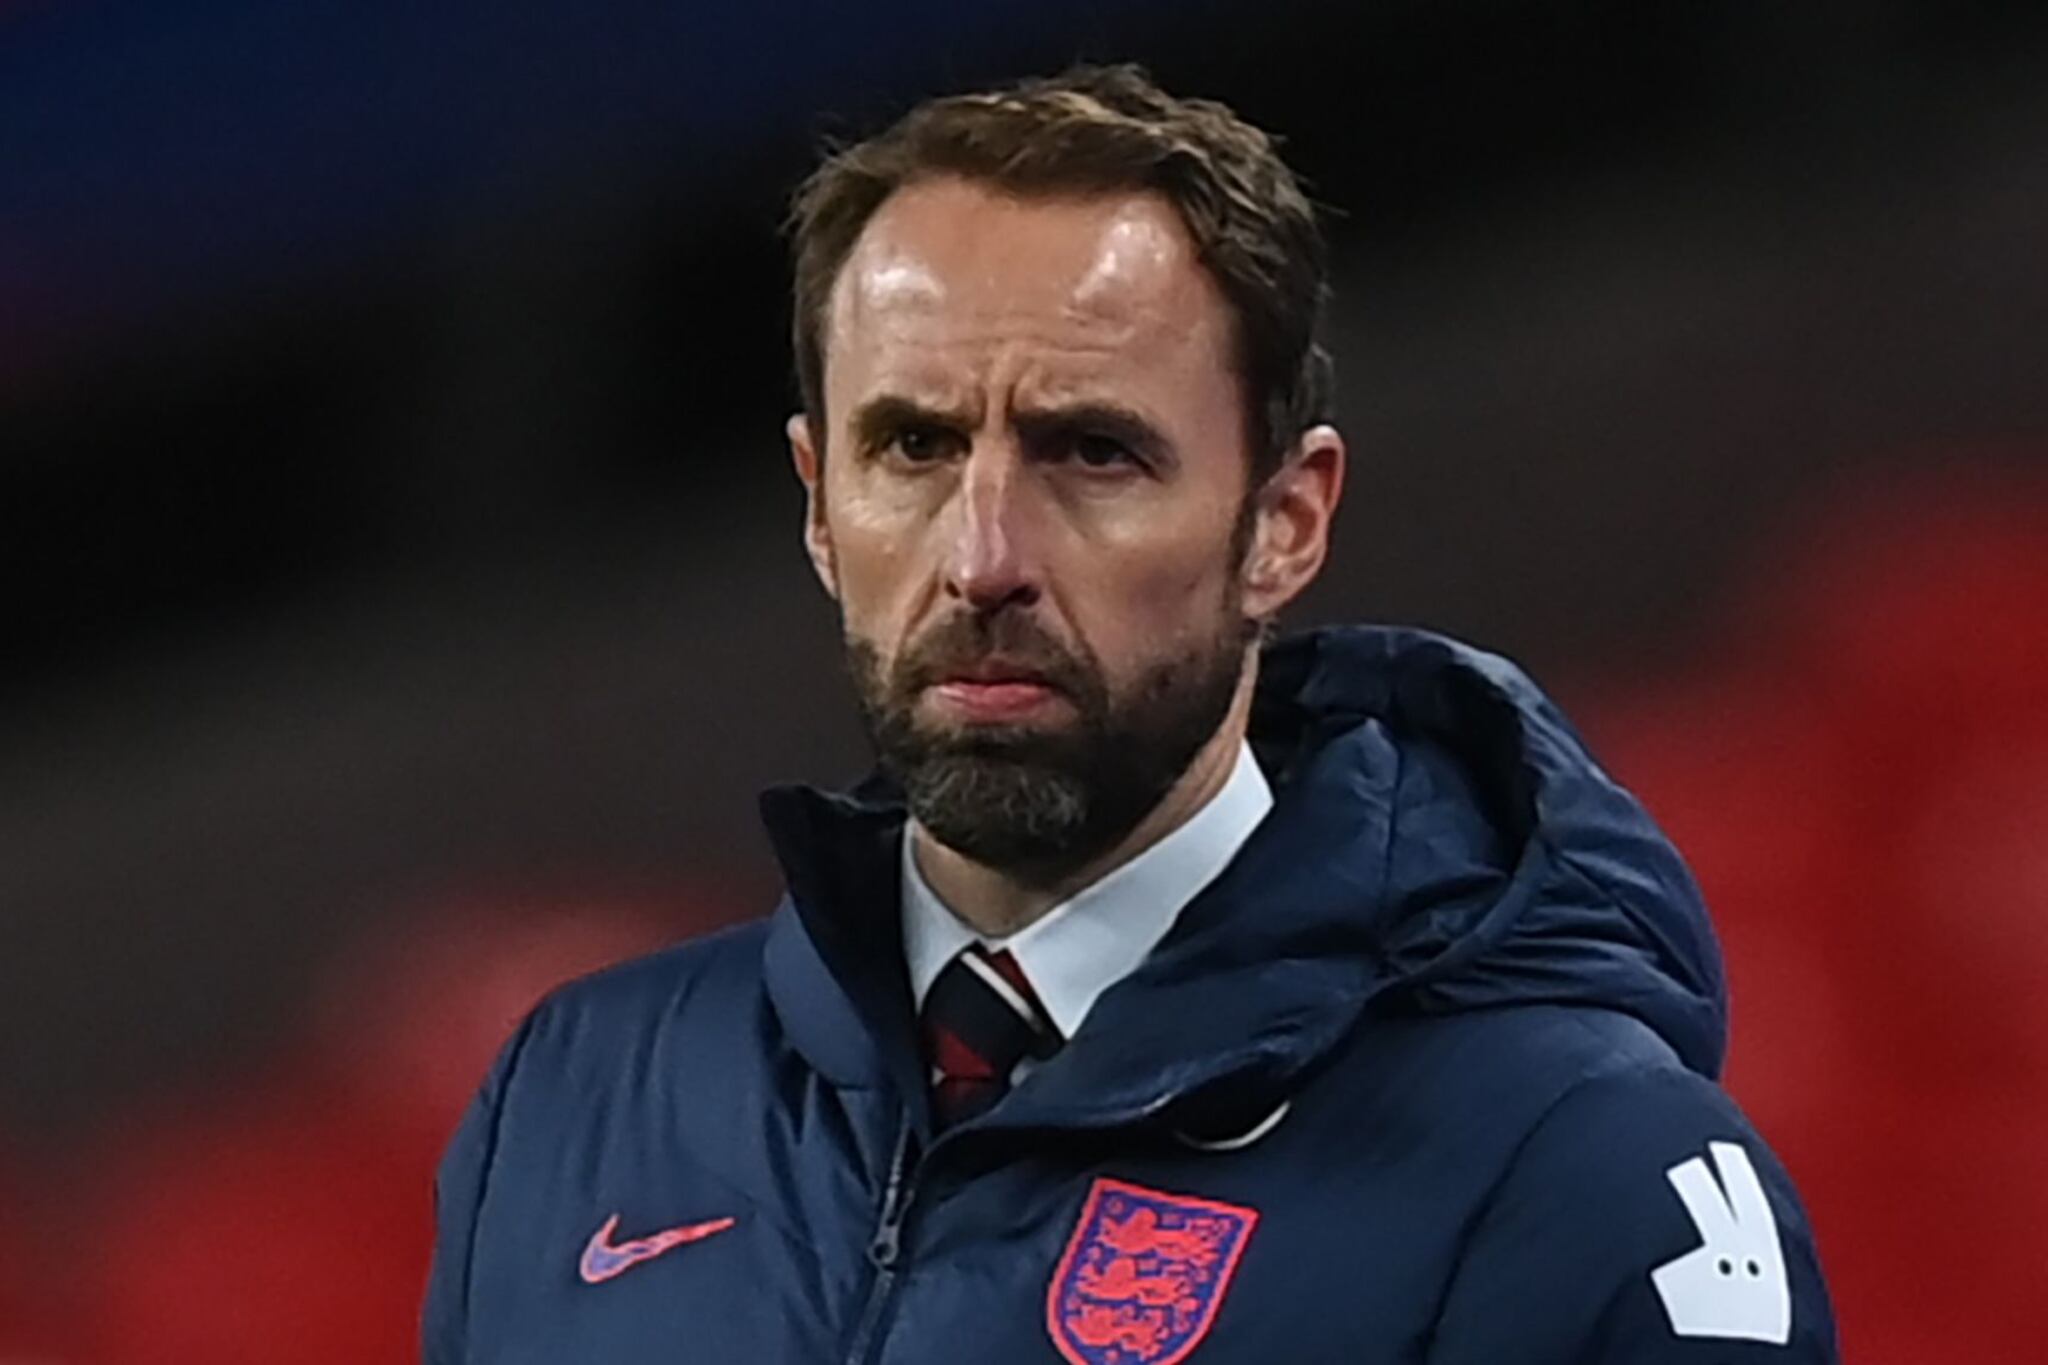 Gareth Southgate: what are the numbers behind his England managerial career?